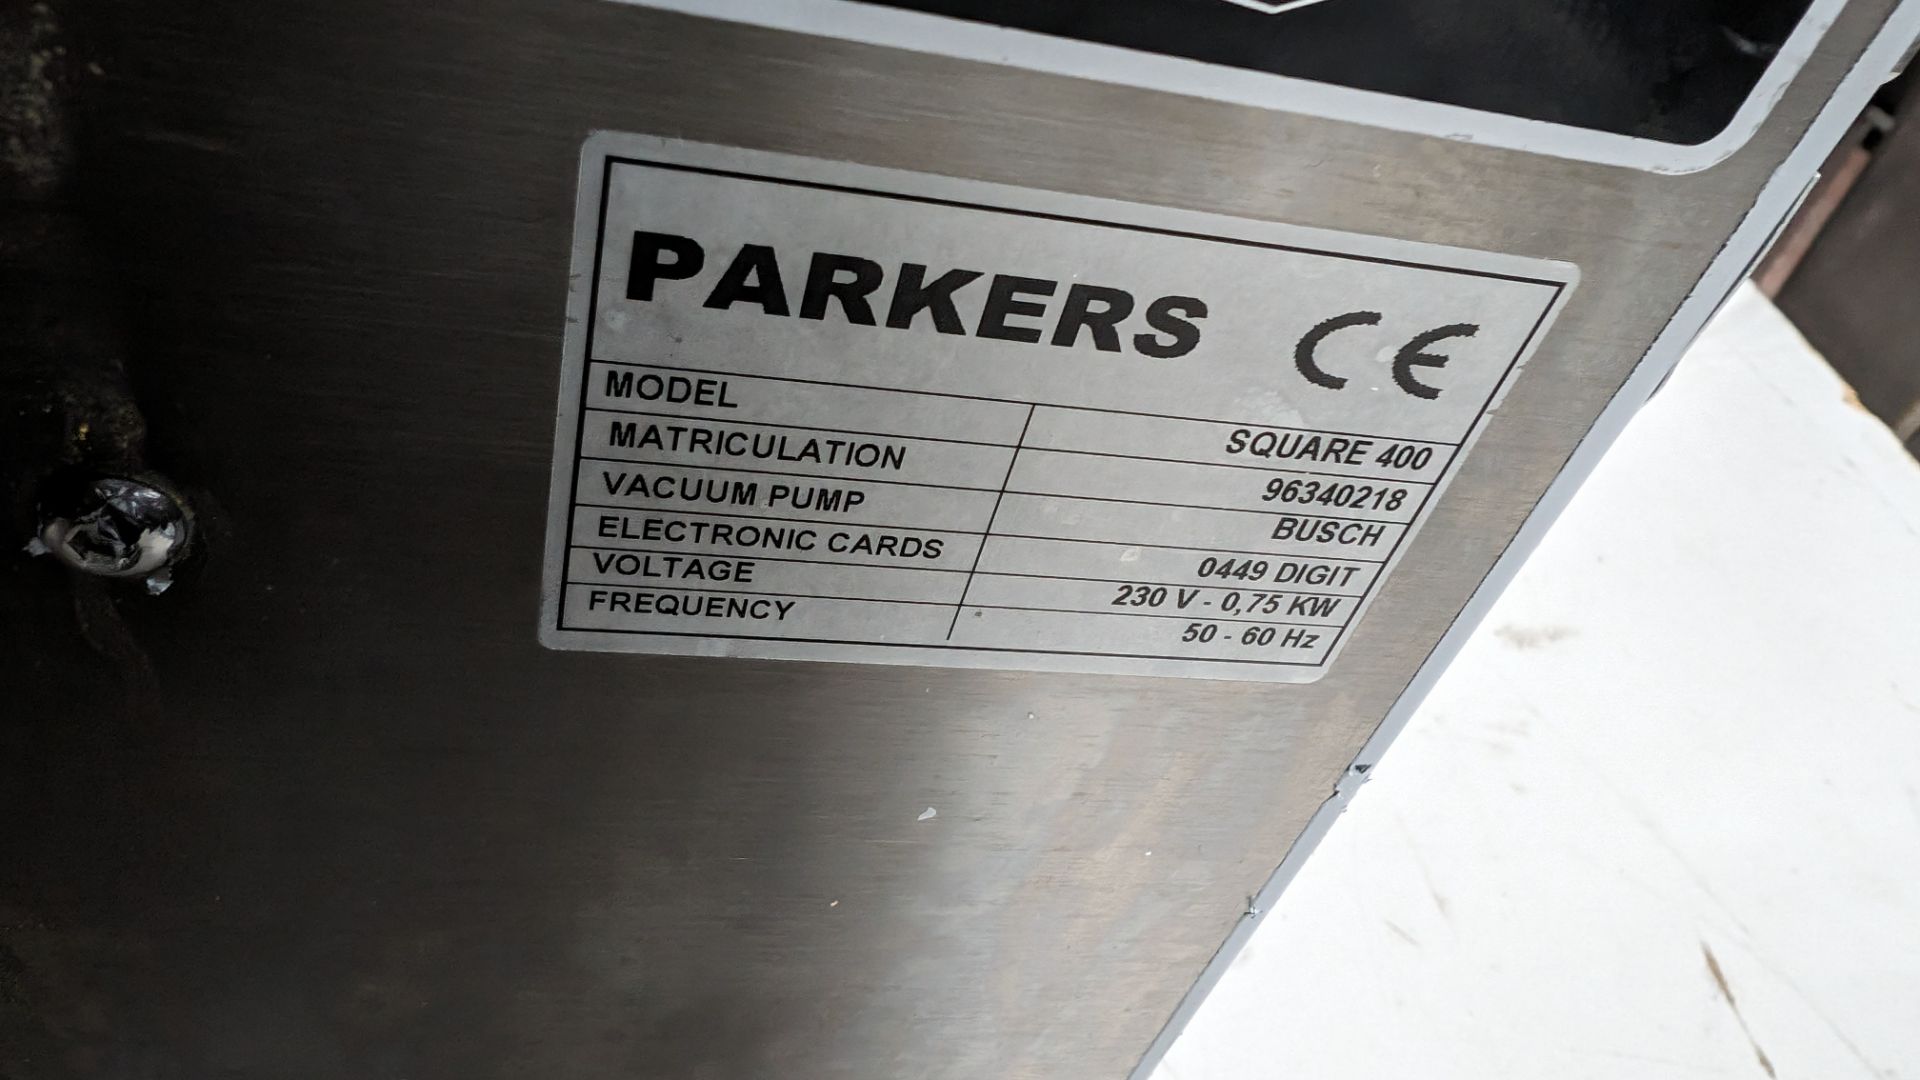 Parkers Food Machinery Plus benchtop stainless steel vacuum chamber machine, model Square 400 - Image 6 of 9